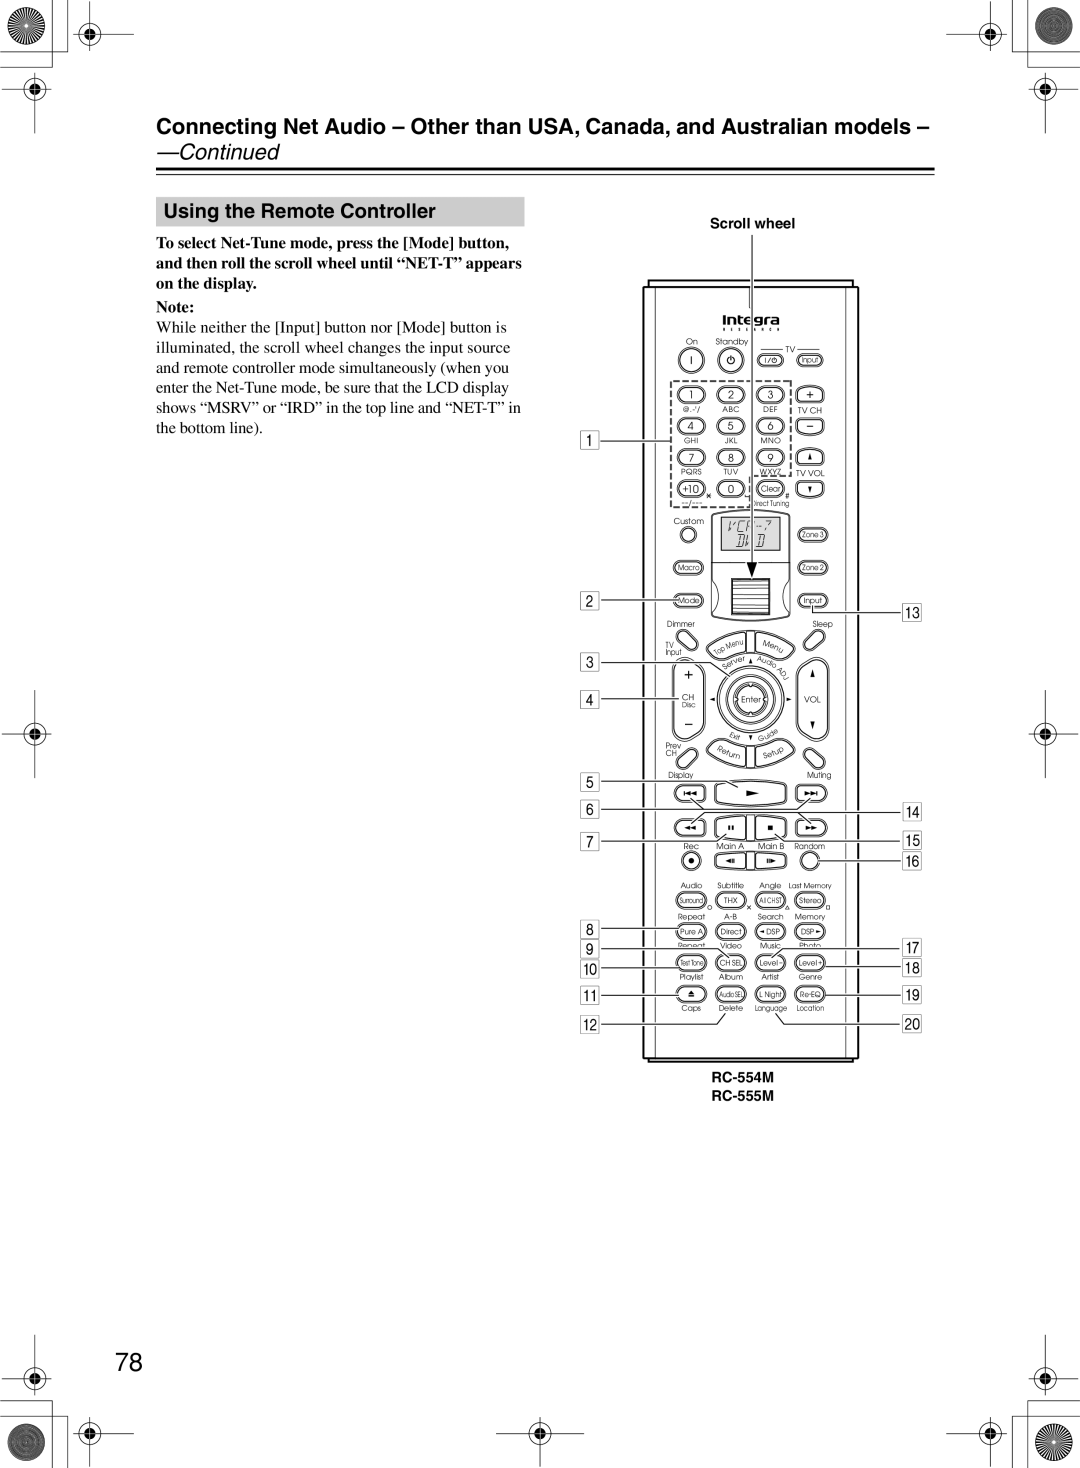 Integra RDC-7.1 instruction manual Continued, Using the Remote Controller, Standby 